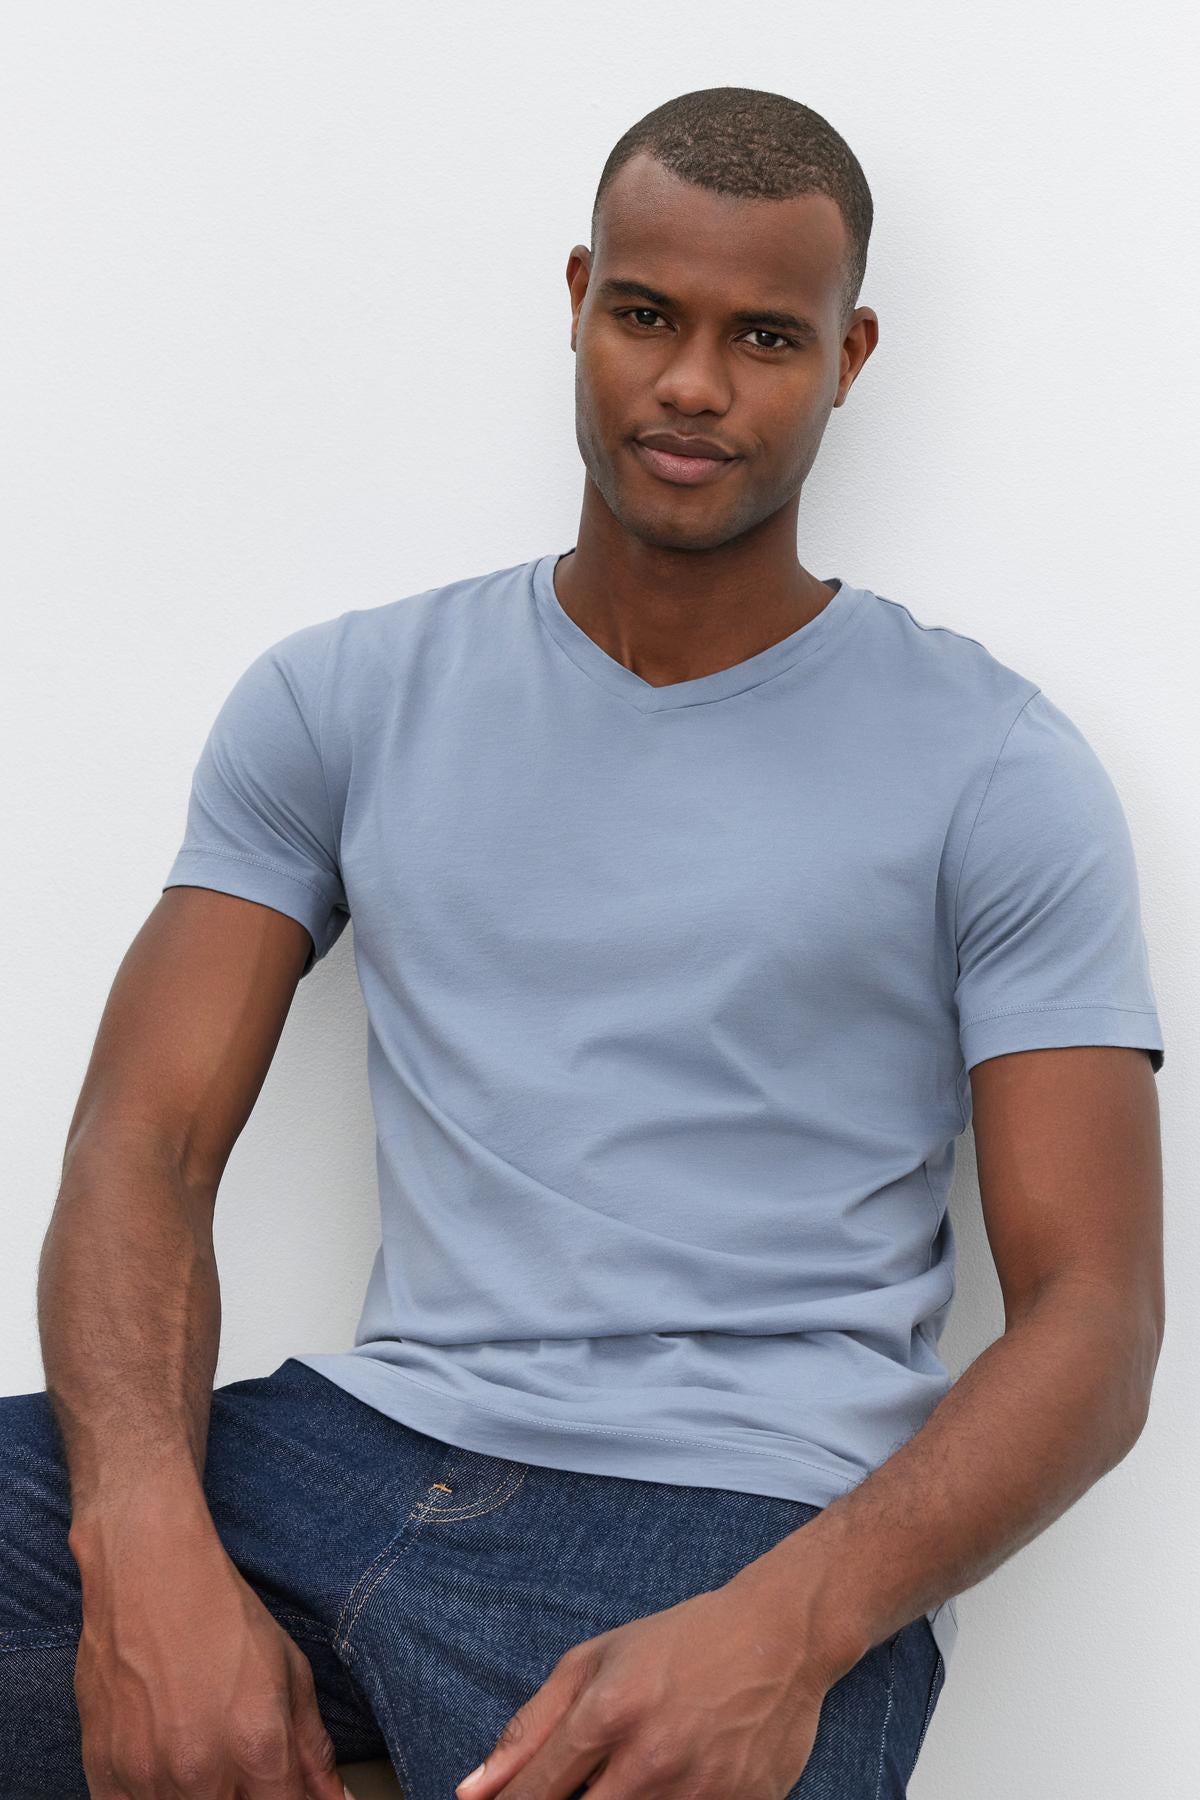 A man in a light blue SAMSEN TEE by Velvet by Graham & Spencer with a whisper cotton knit and dark jeans is seated against a plain white background.-37386148708545